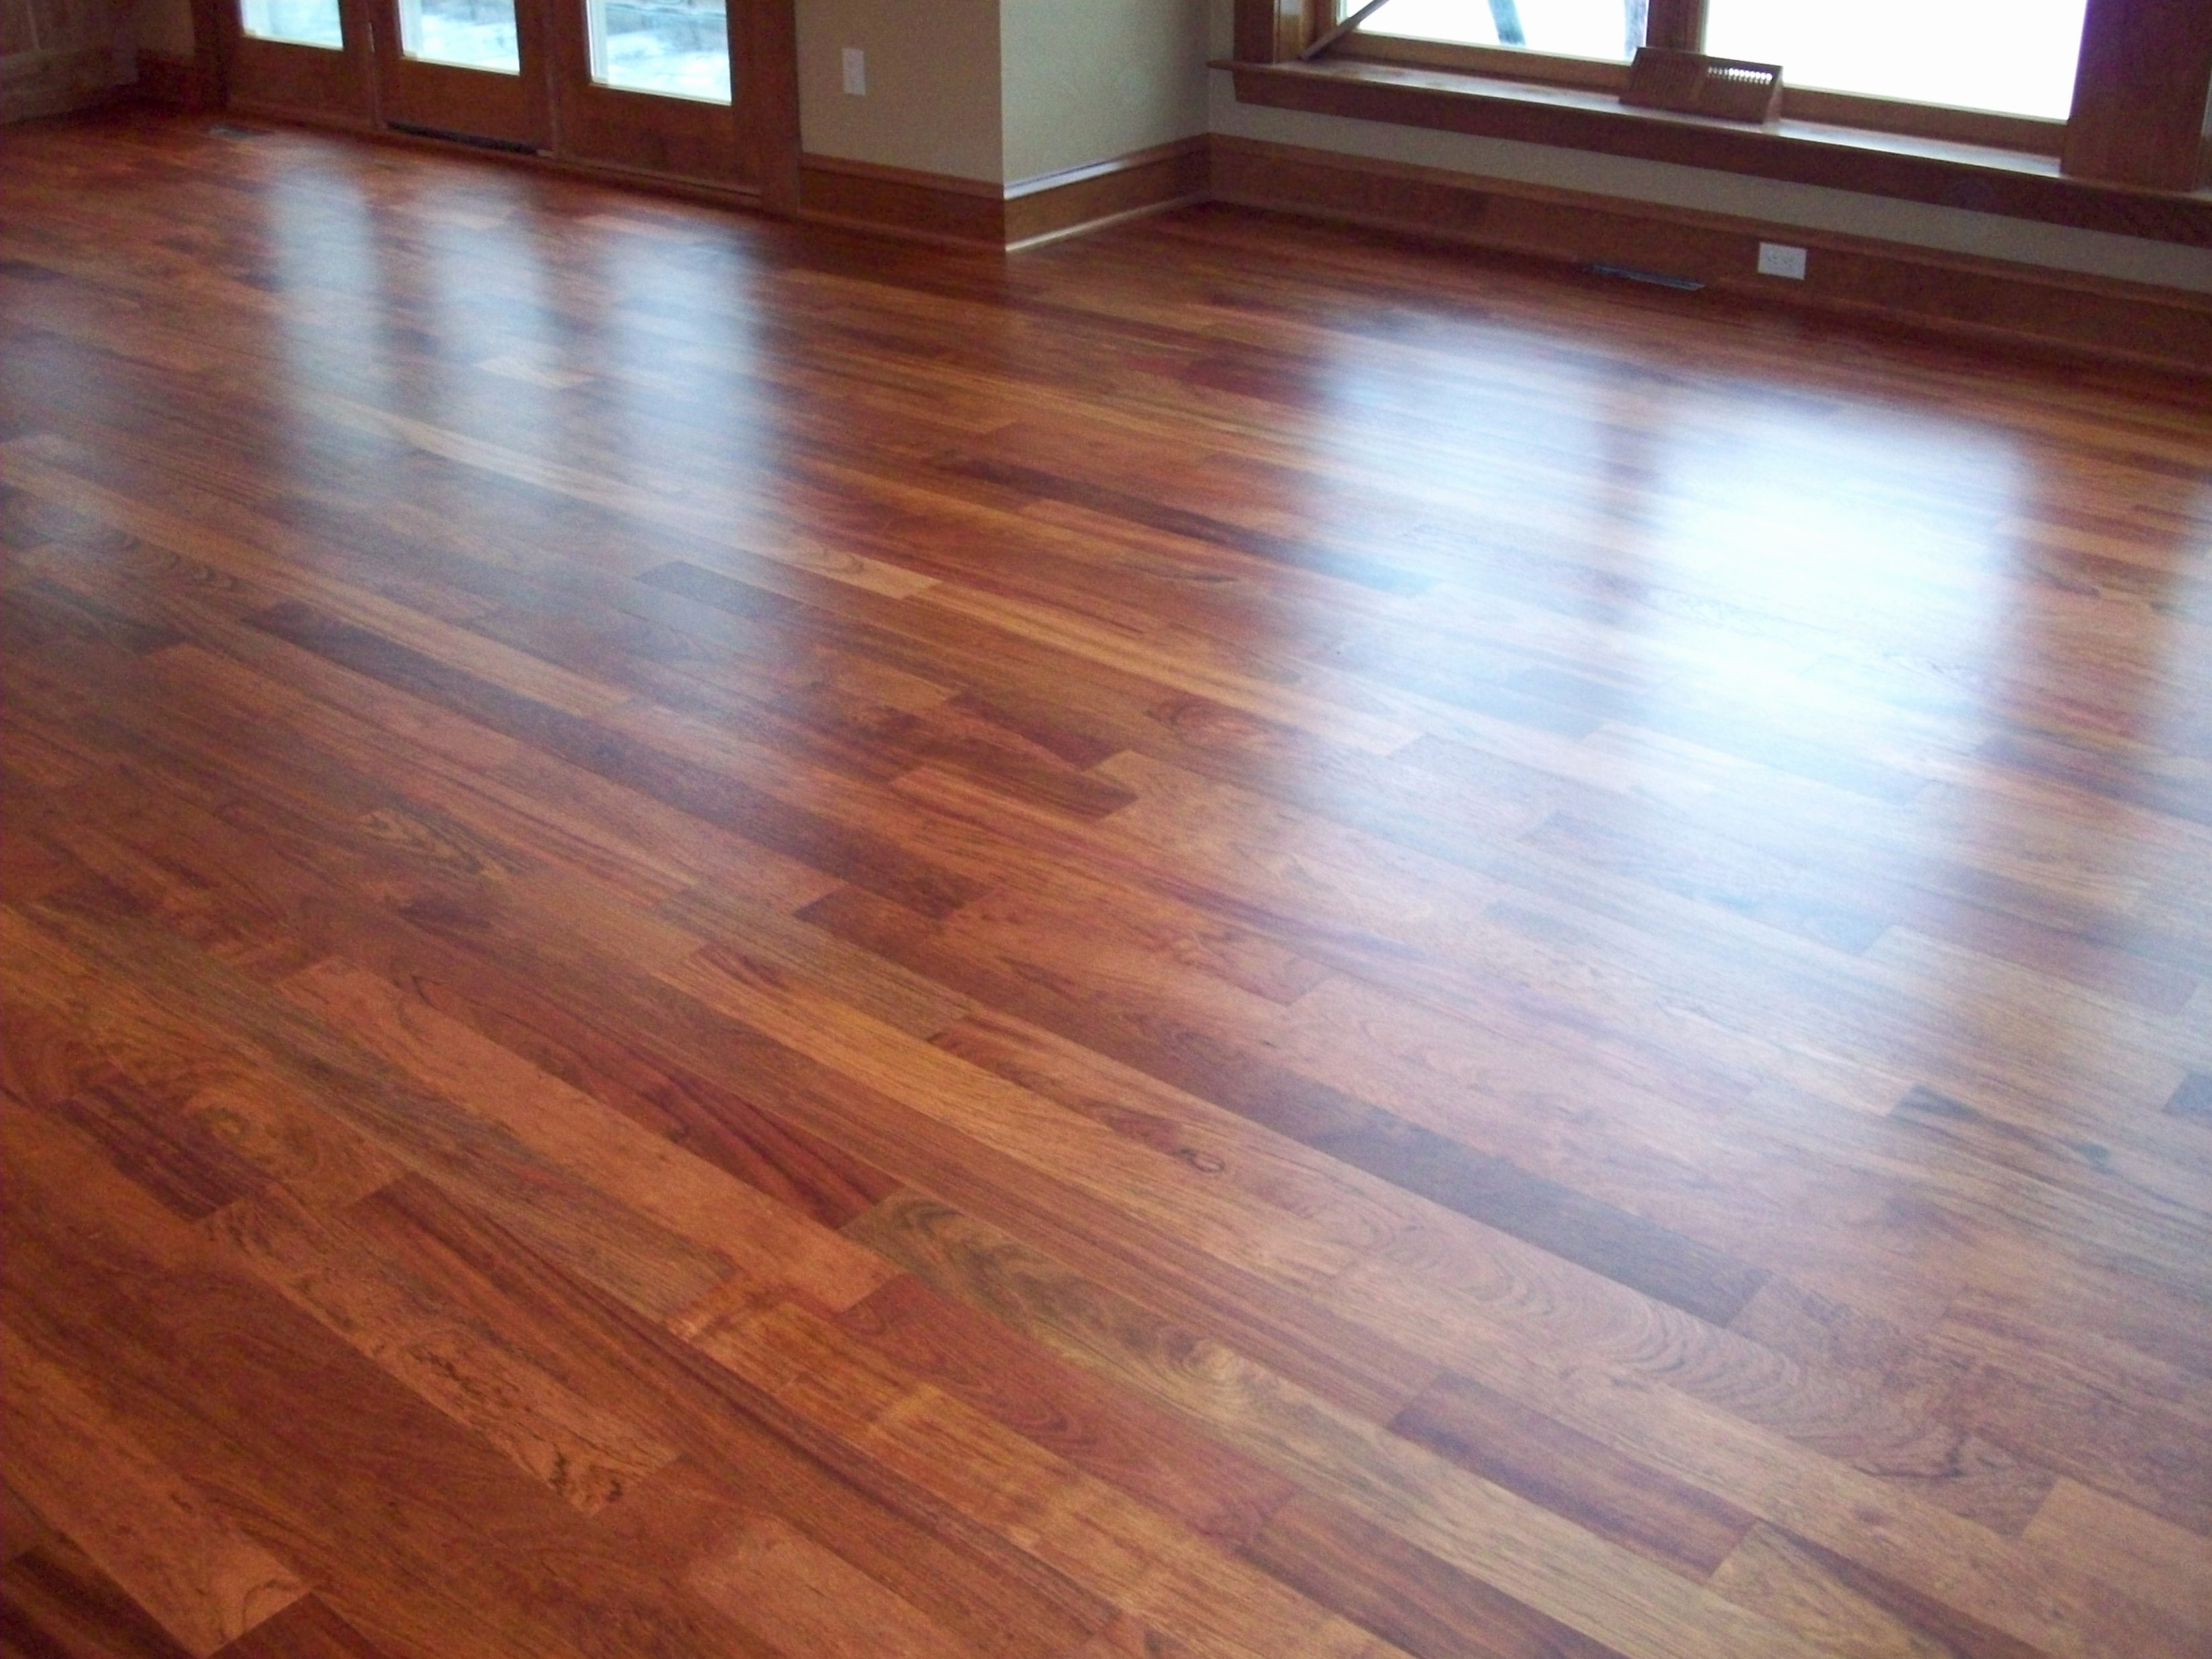 23 Awesome Cost Of Laminate Flooring Vs Hardwood 2024 free download cost of laminate flooring vs hardwood of laminate wood floor cleaner best of refinishing hardwood floors for laminate wood floor cleaner photo of engaging discount hardwood flooring 5 where 